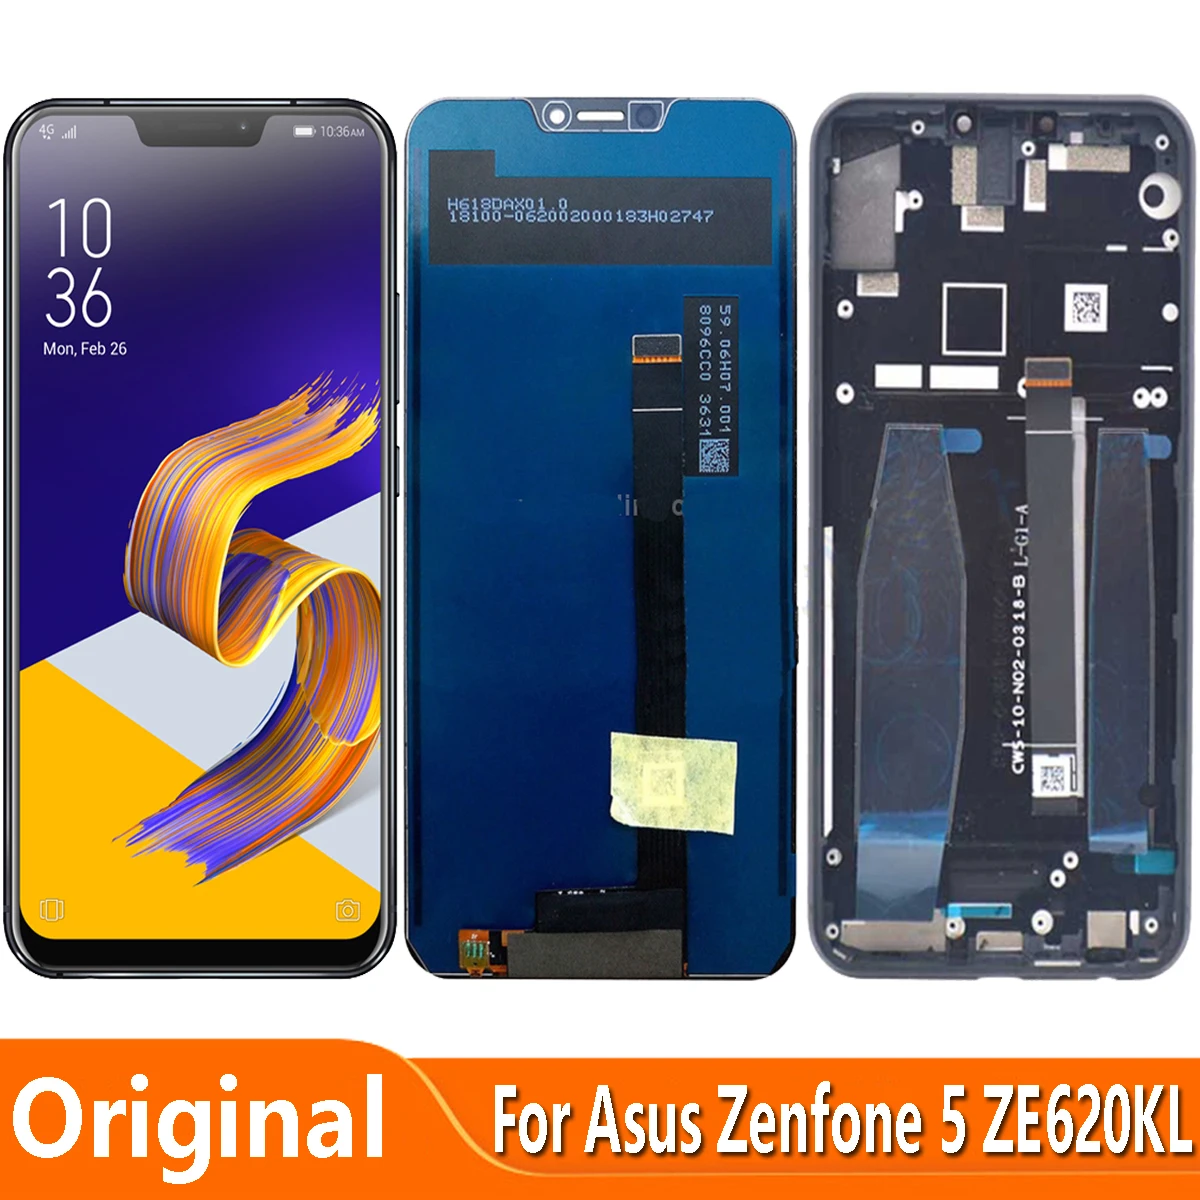 

Original Display Replace 6.2" For Asus Zenfone 5 ZE620KL X00QD ZF620KL LCD Touch Screen Digitizer Assembly